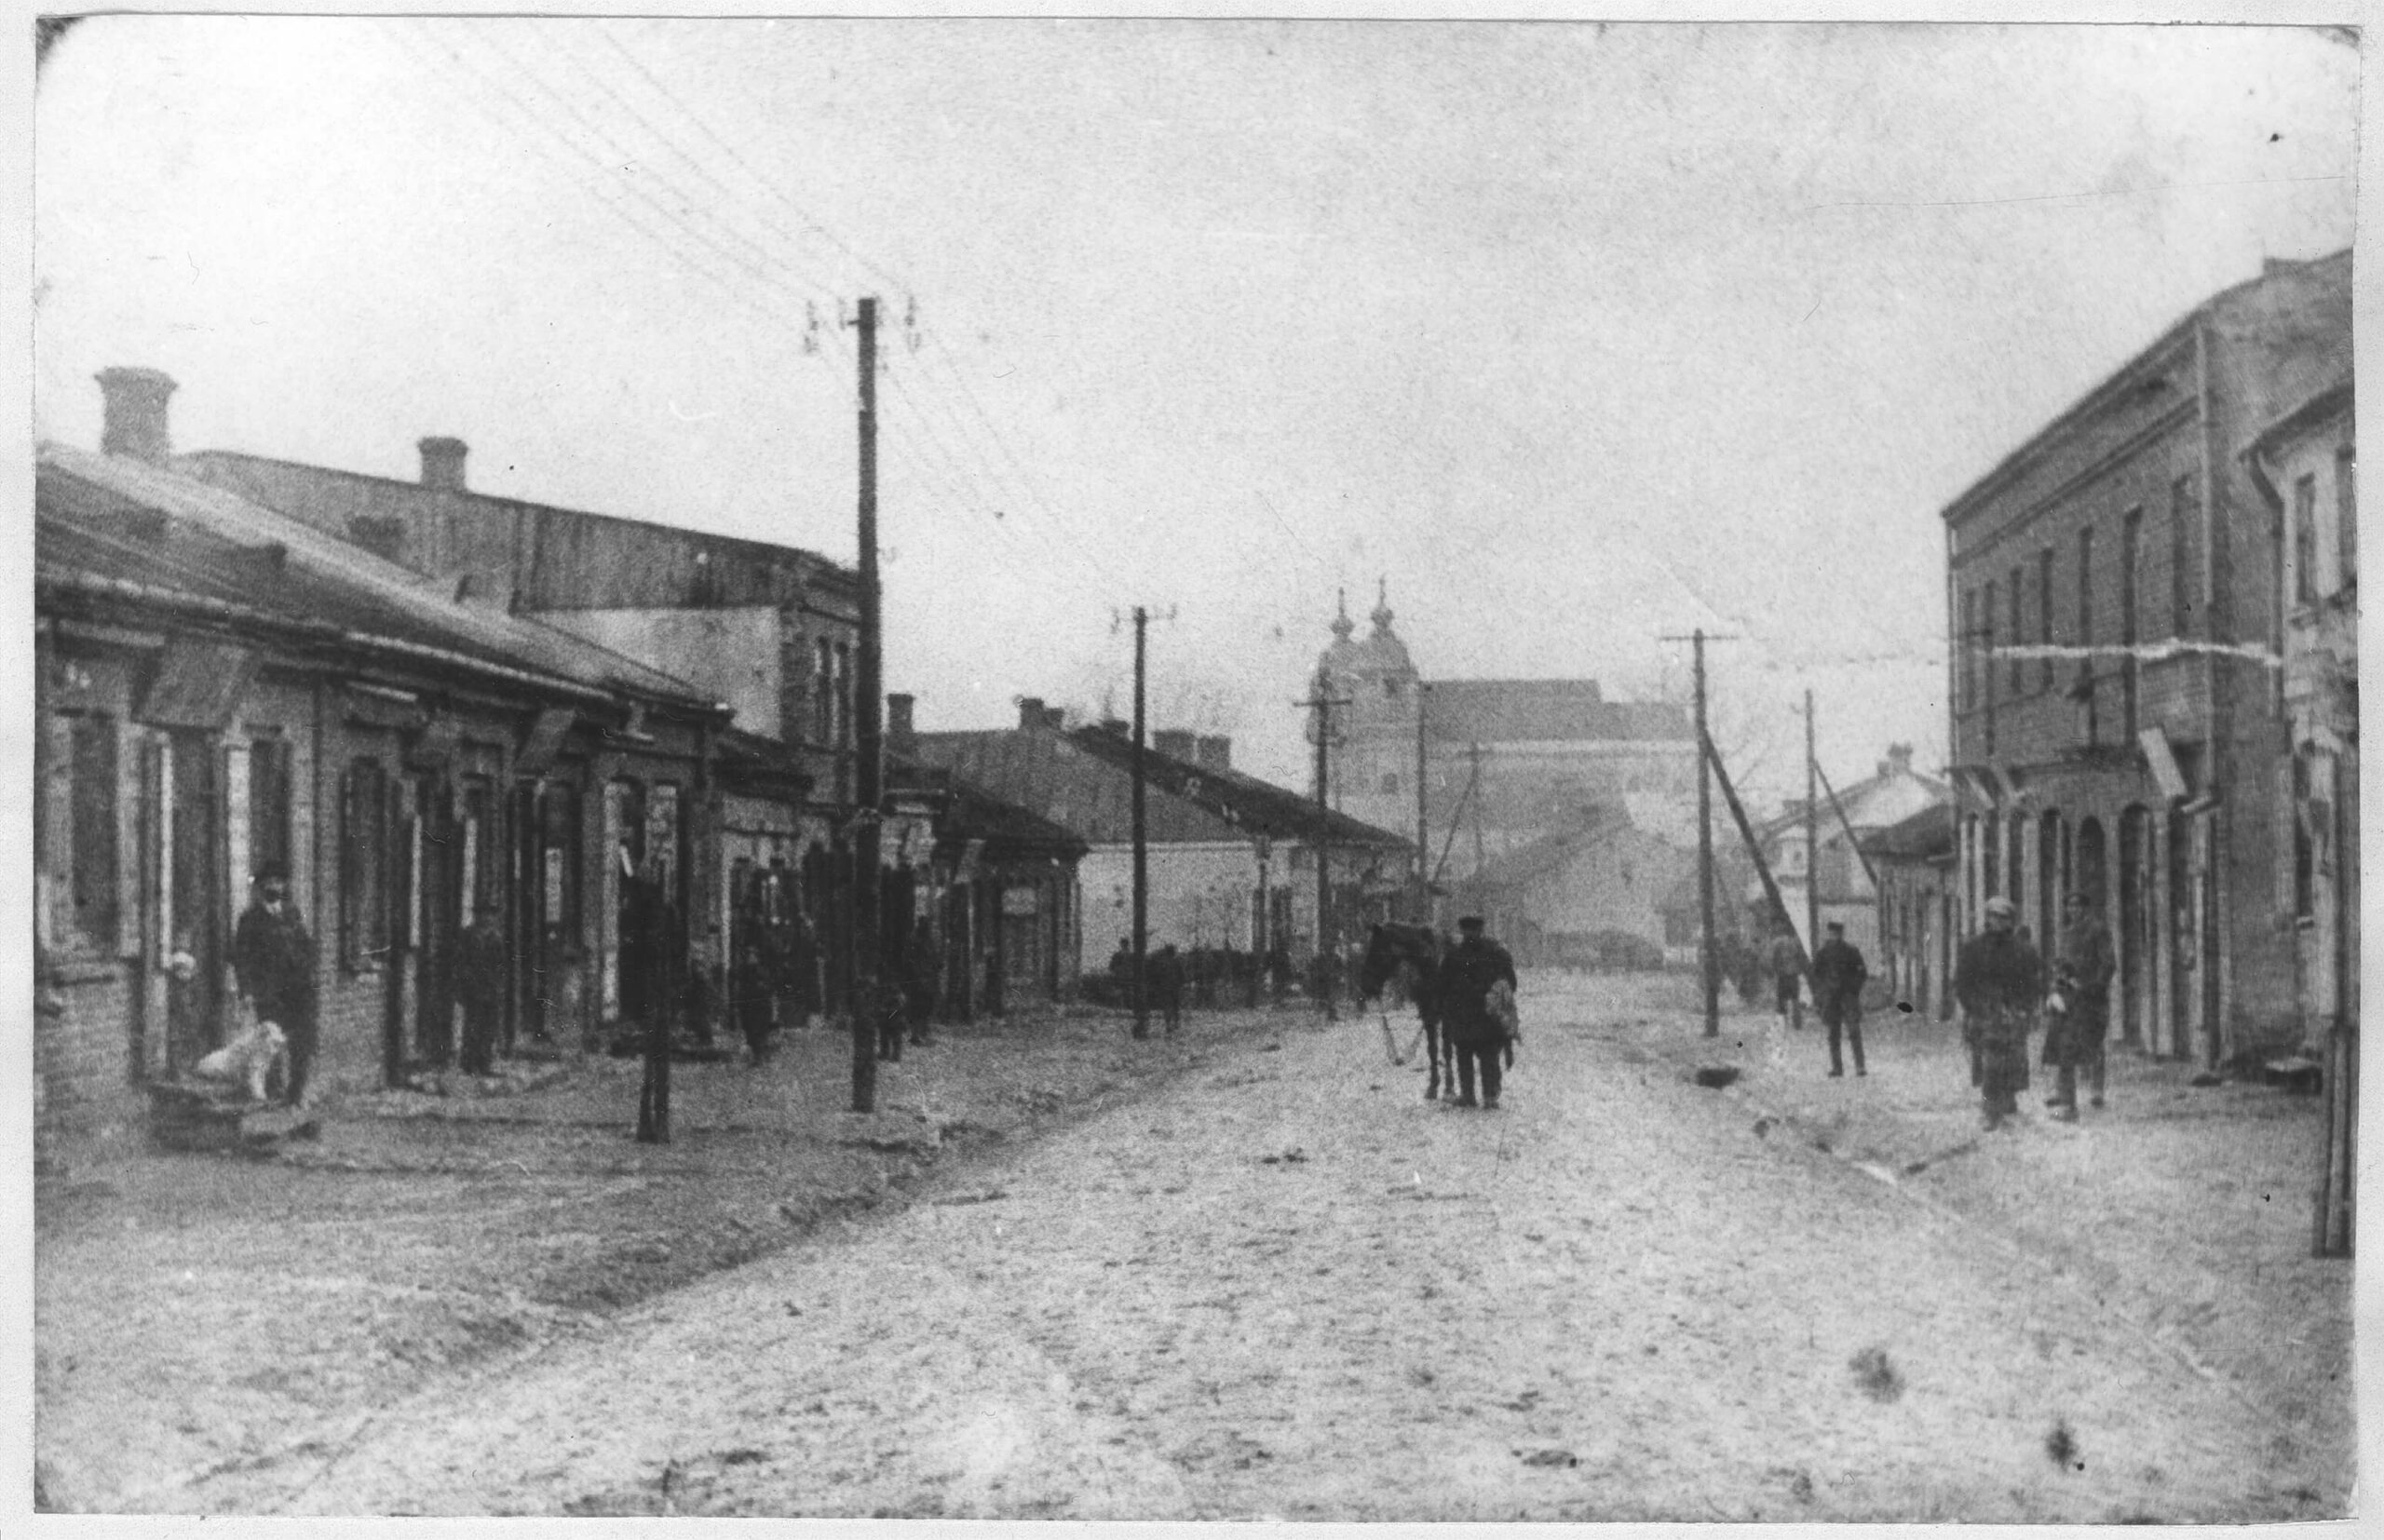 Senatorska Street in Warka with clearly visible powerline, photo, 1930s